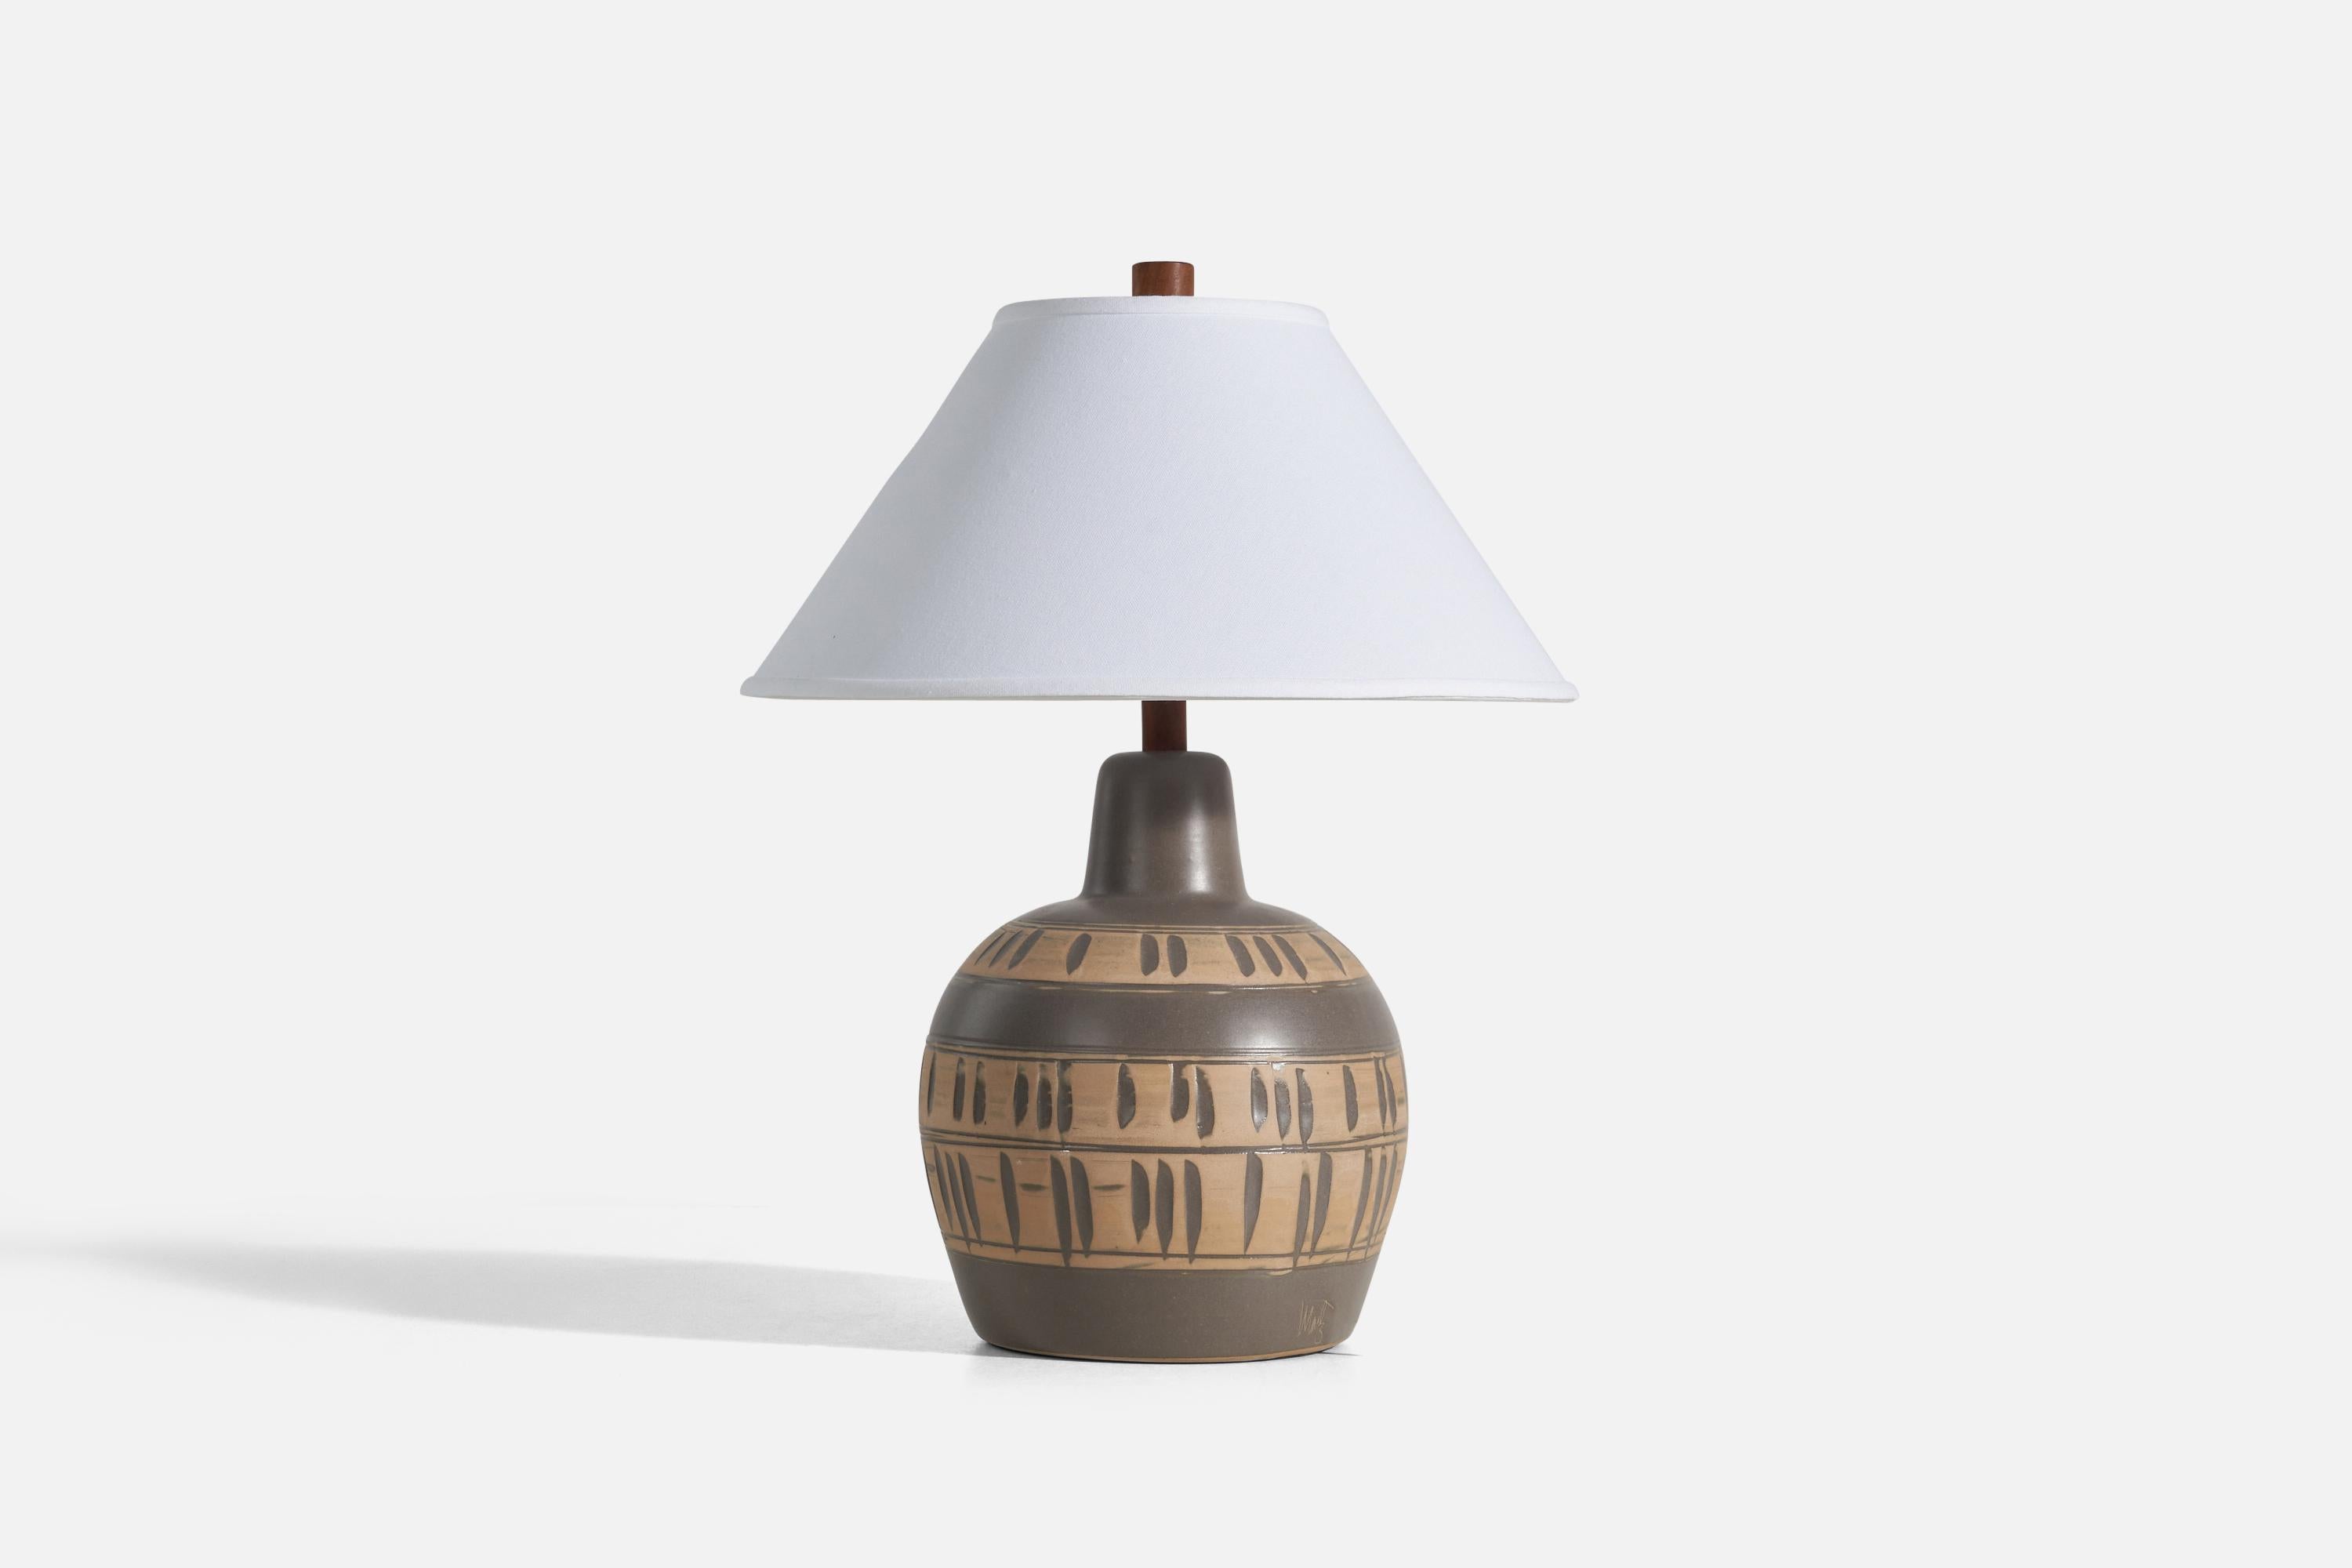 A brown ceramic and walnut table lamp designed by Jane & Gordon Martz and produced by Marshall Studios, Indianapolis, 1960s. 

Sold without lampshade.
Dimensions of lamp (inches) : 15.56 x 9.5 x 9.5 (Height x Width x Depth)
Dimensions of